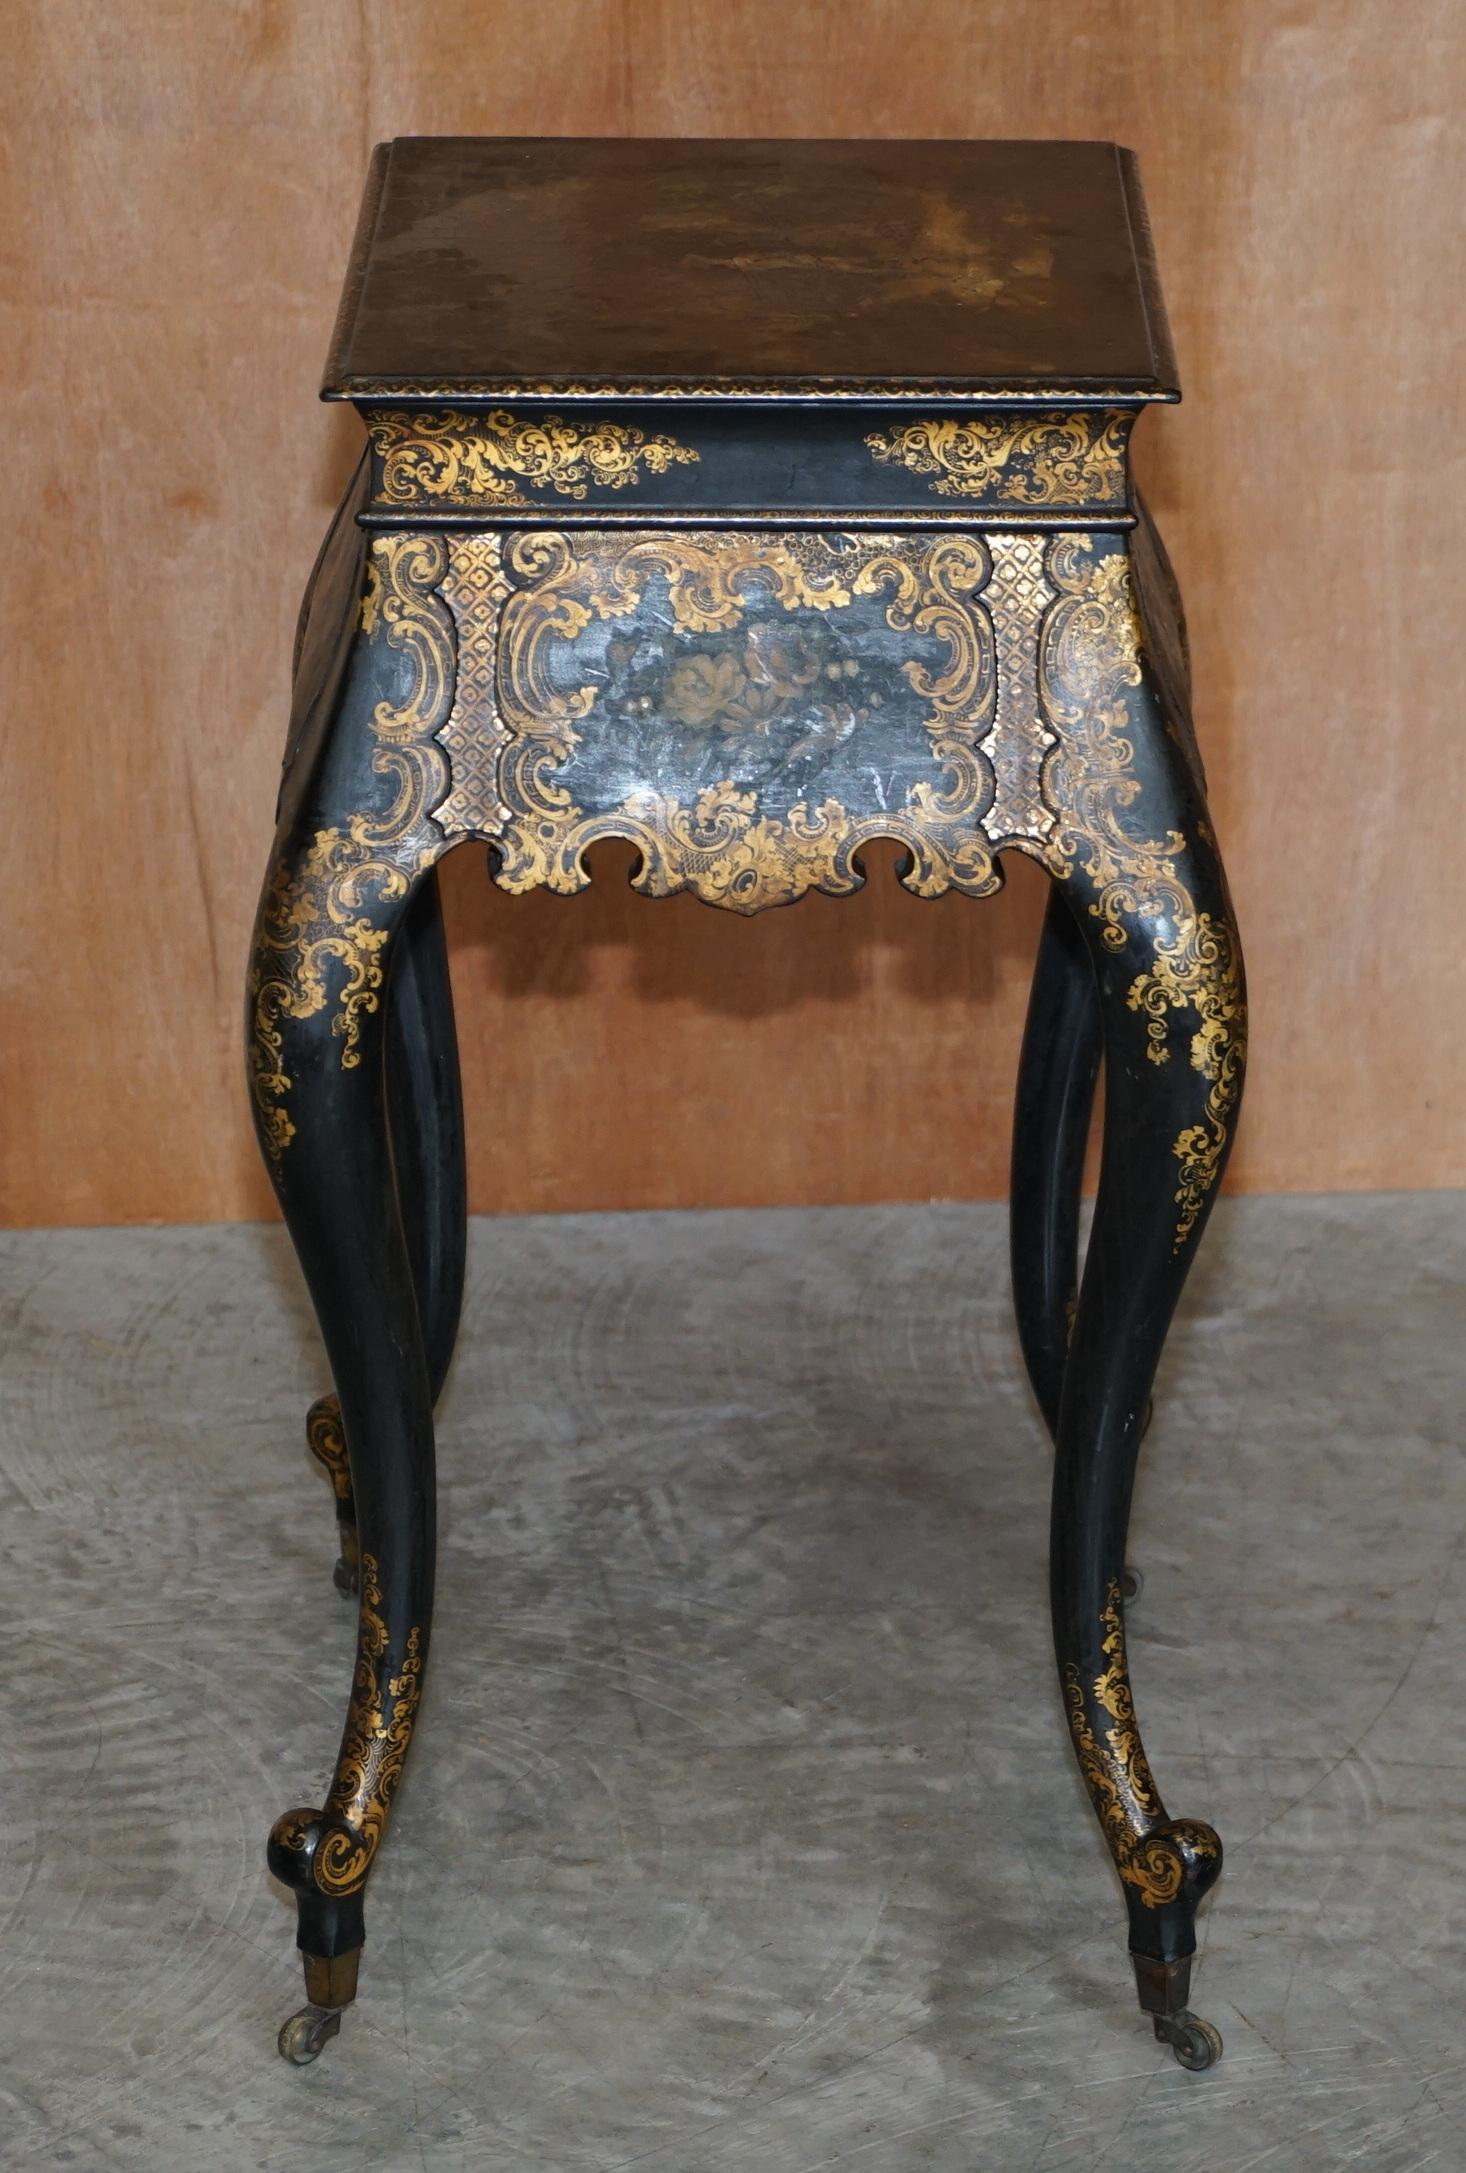 Georgian Antique circa 1800 George III Chinese Lacquer & Gold Gilt Work Table For Sale 5